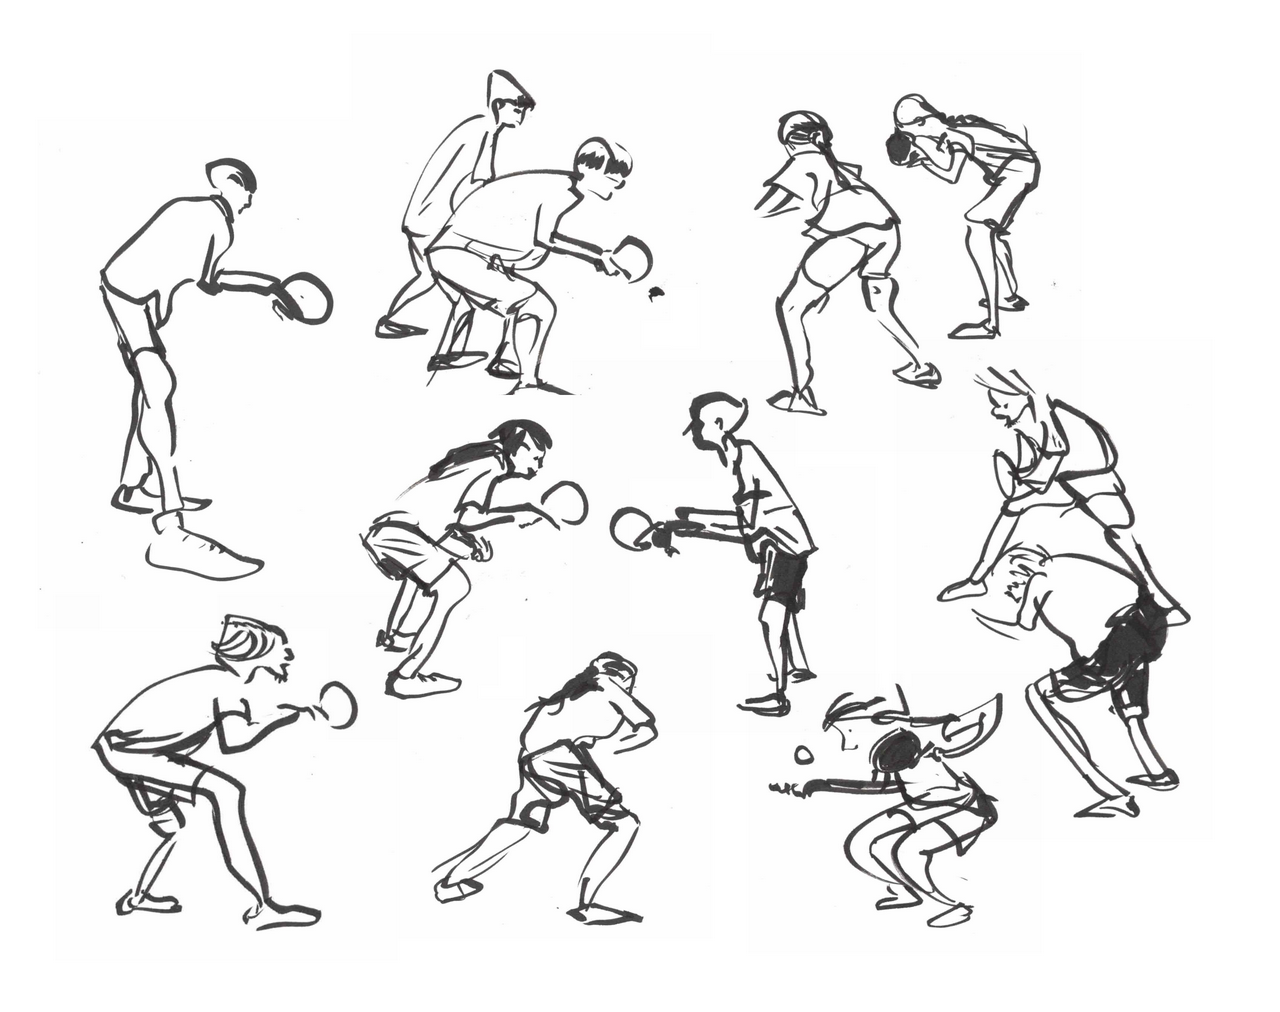 A collection of quick black brush pen sketches of young people playing table tennis.